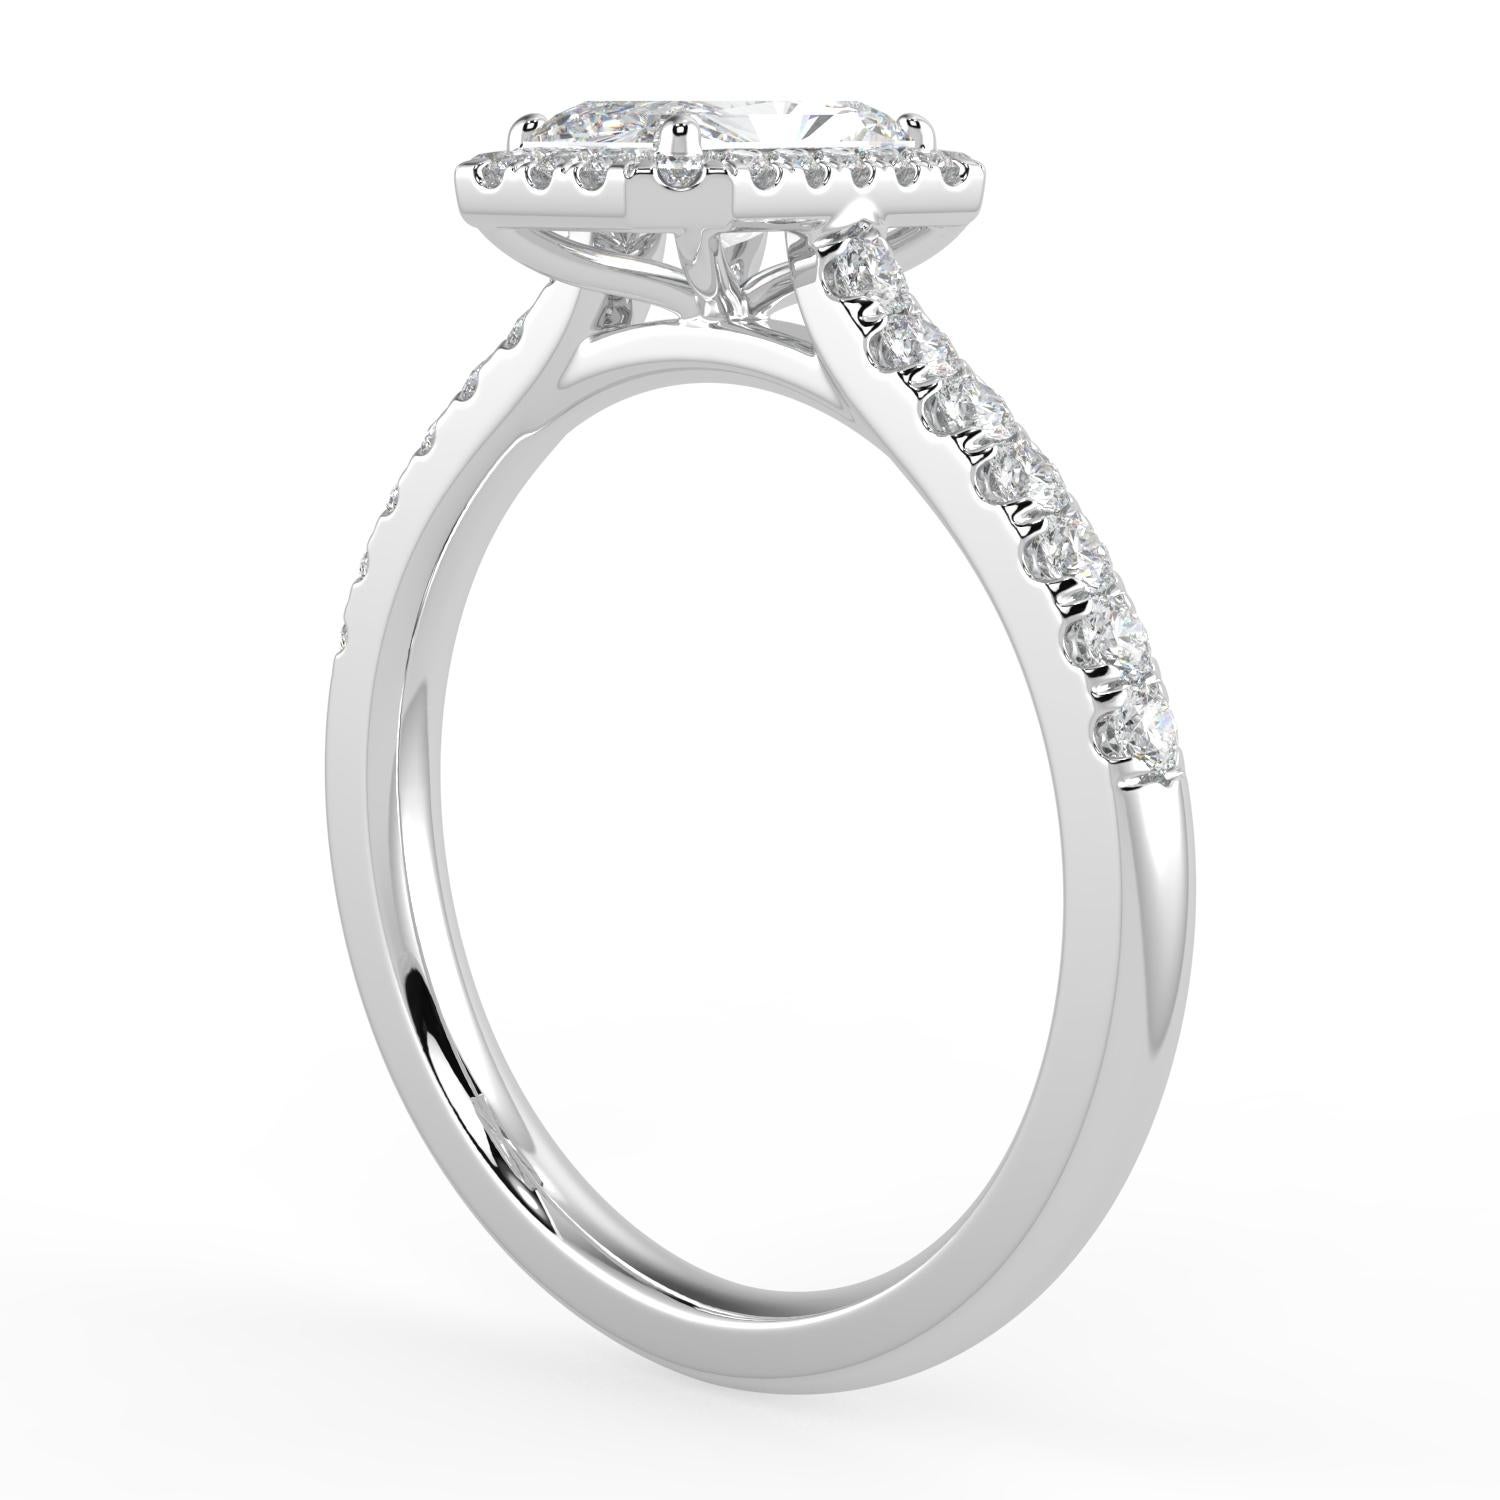 AAMIAA DIAMOND RING
1ct Natural Diamond G-H Color SI Clarity Perfect Design Shape Halo Fashion Stunning Promise Ring 14K White Gold

Specification:
Brand: Aamiaa
Metal: White Gold
Metal Purity: 14k
Center Diamond Shape: Radiant
Design: Halo
Center